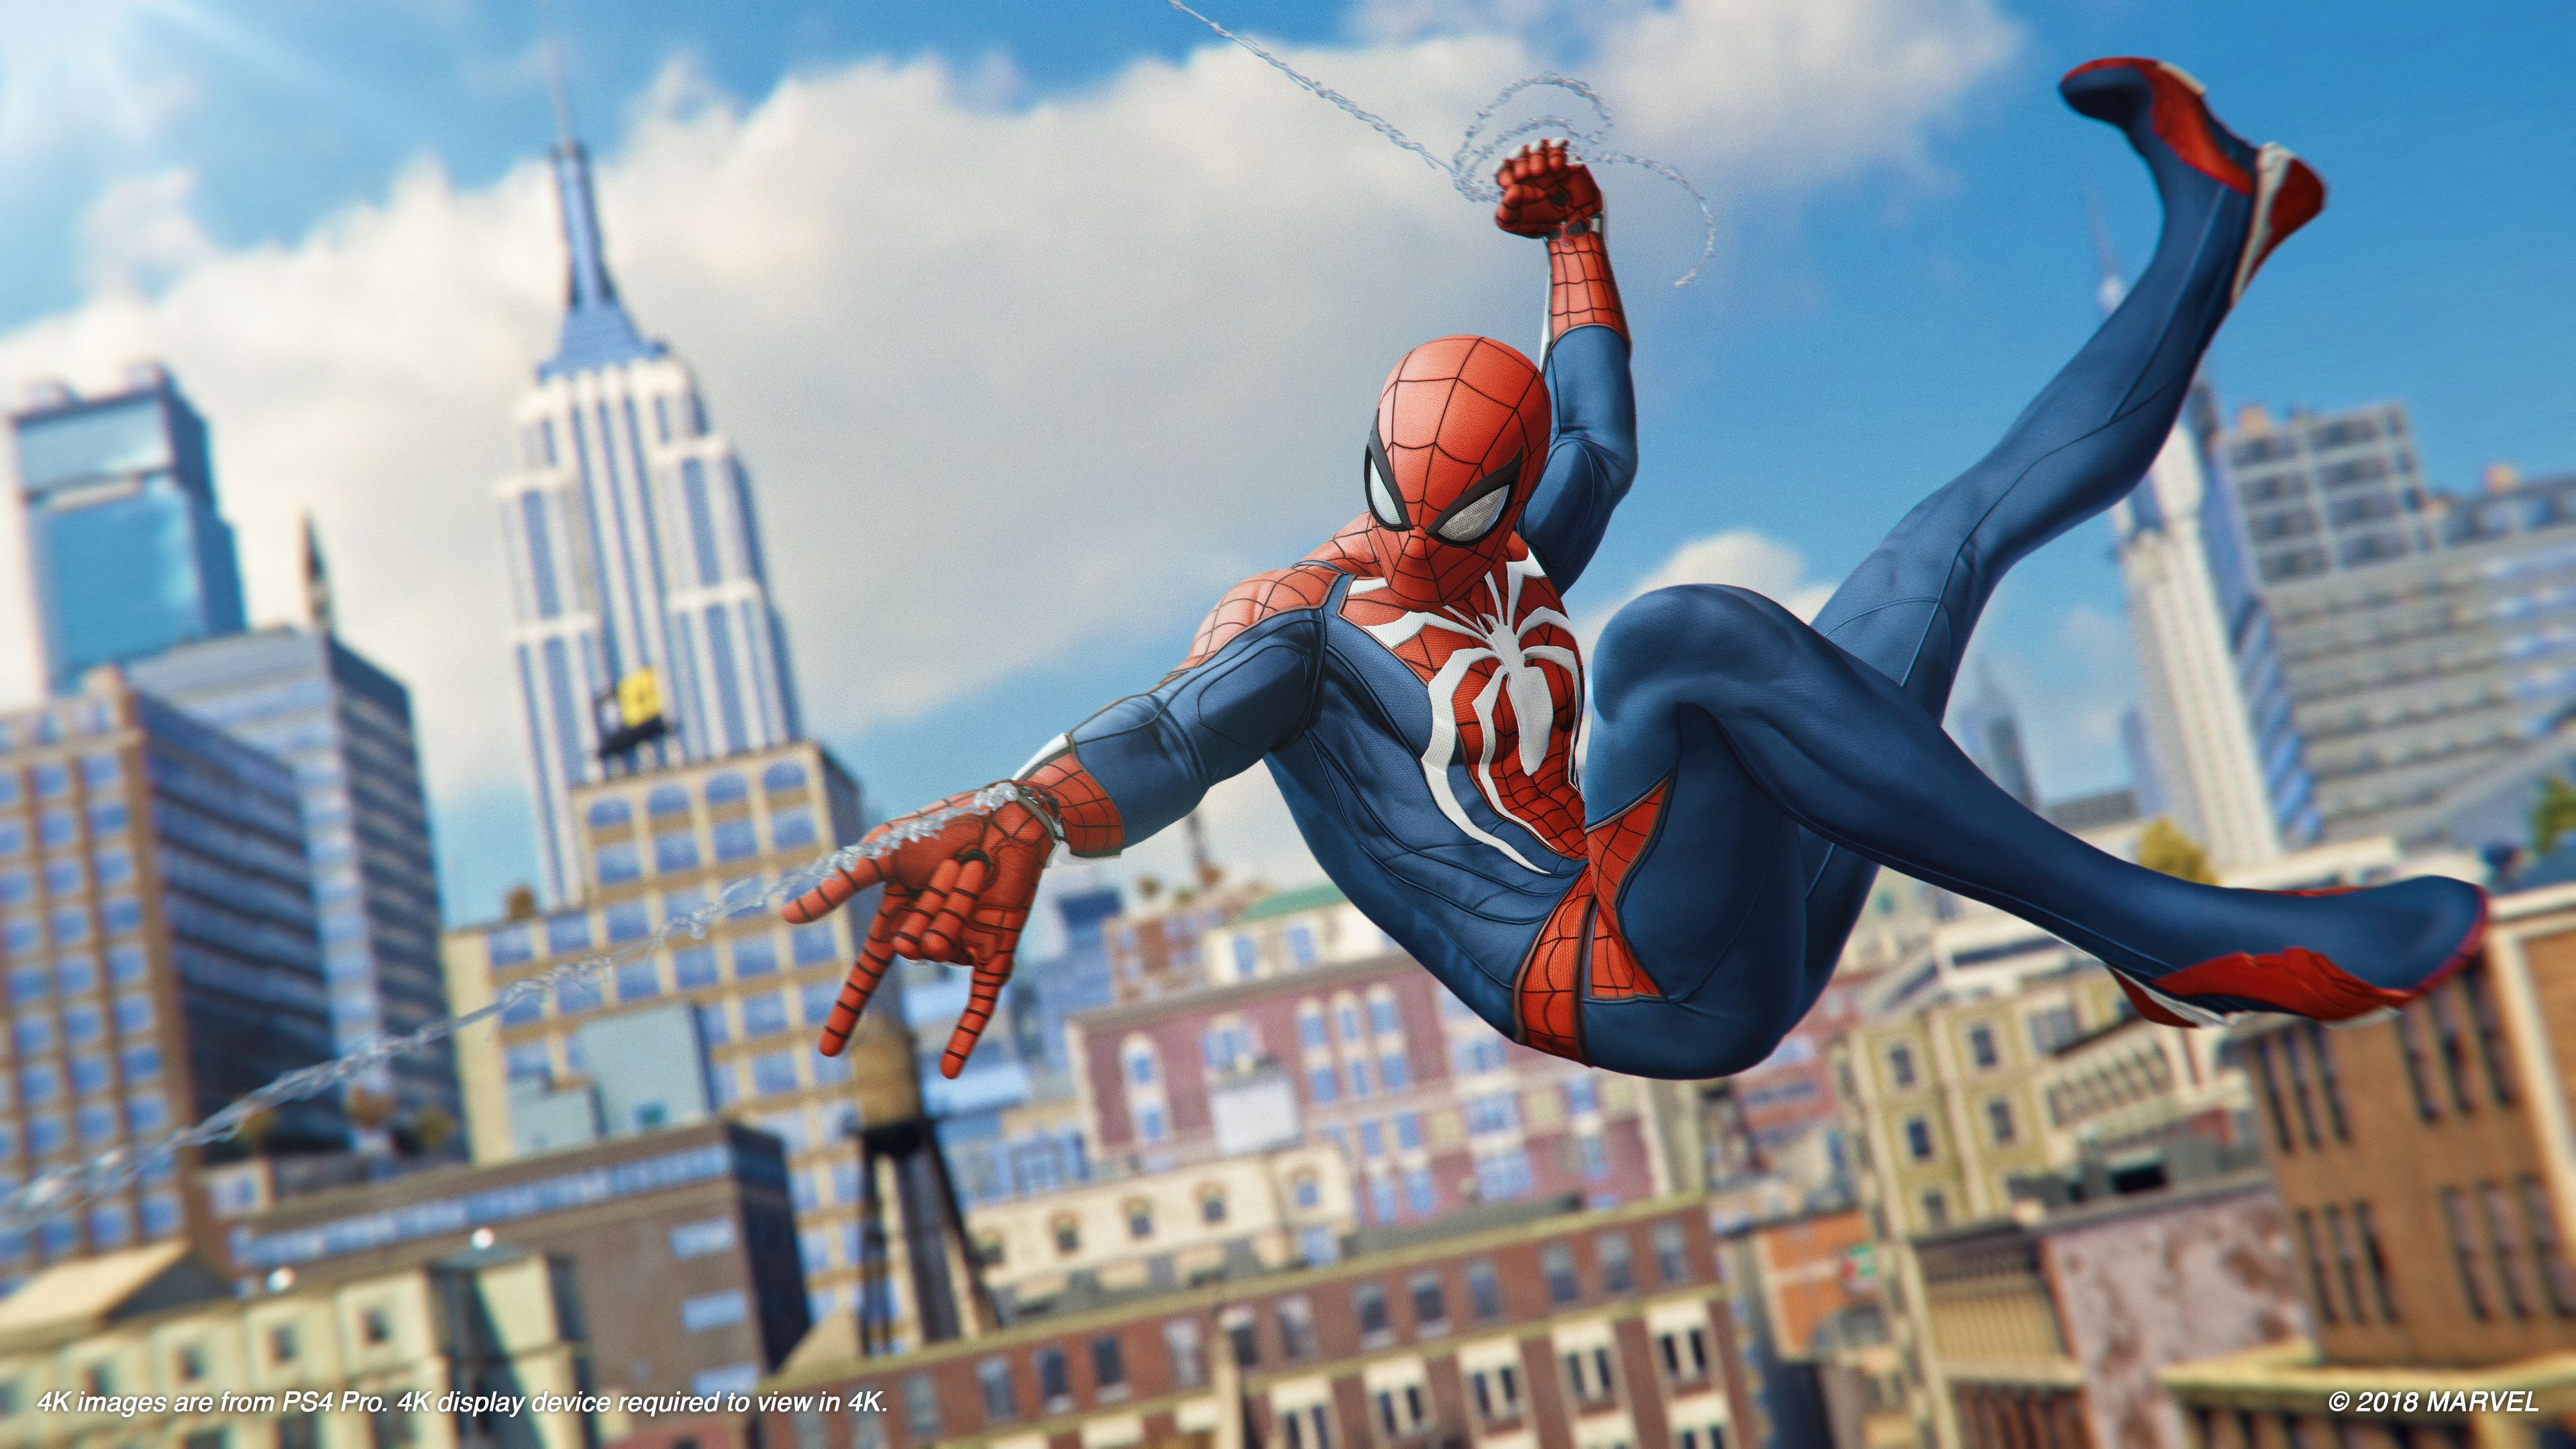 Spider-Man_PS4_Preview_Swing_Day_1532954579